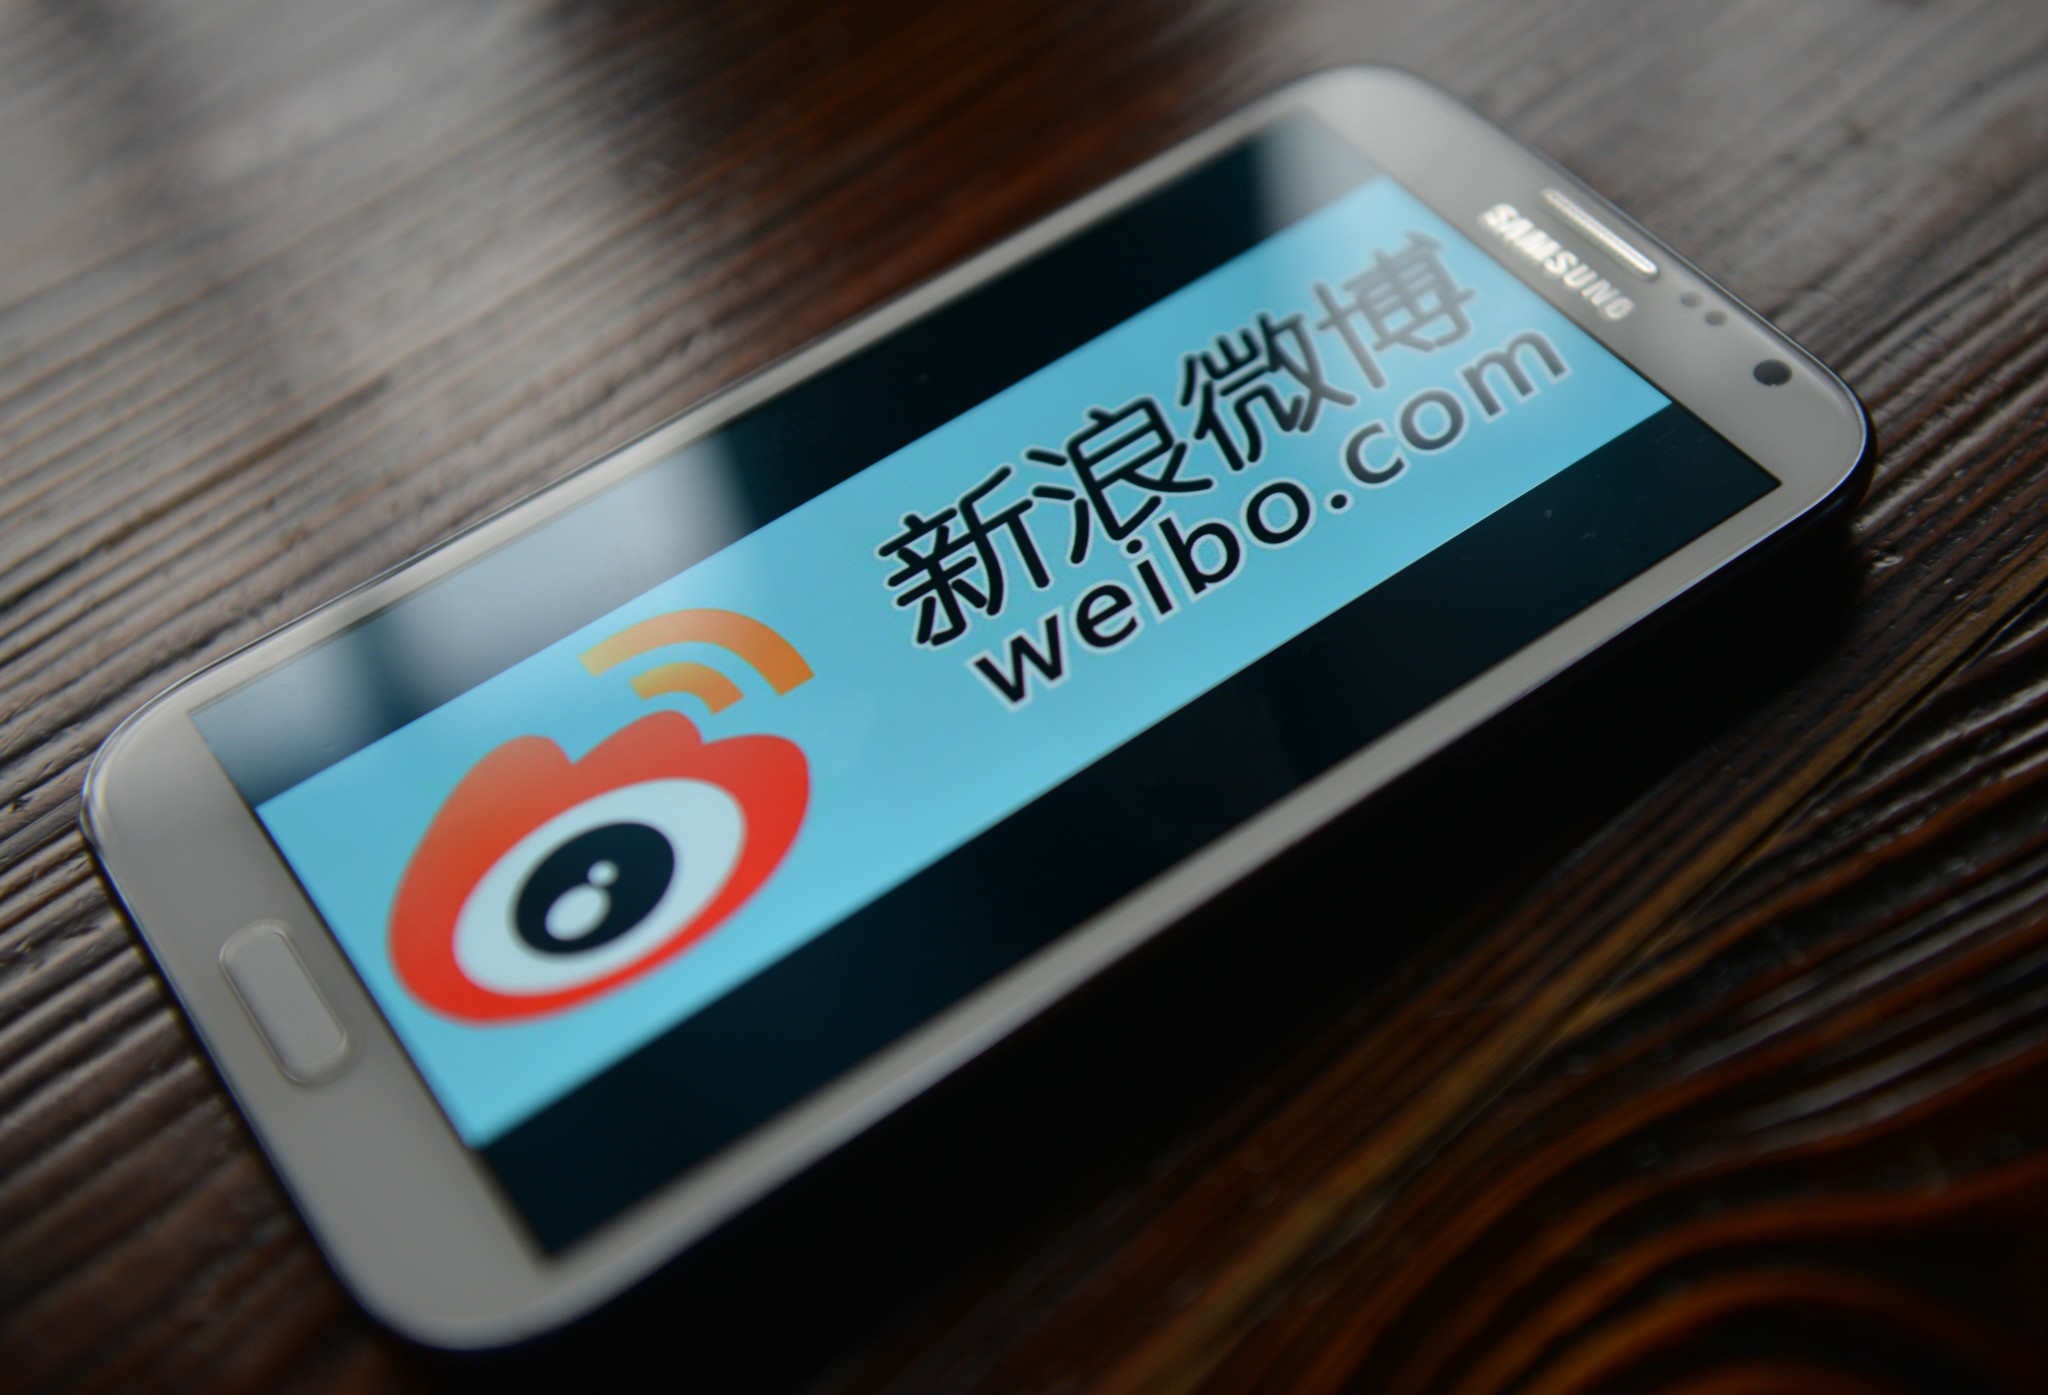 World Games signs up to Chinese social media giant Weibo before Chengdu 2025